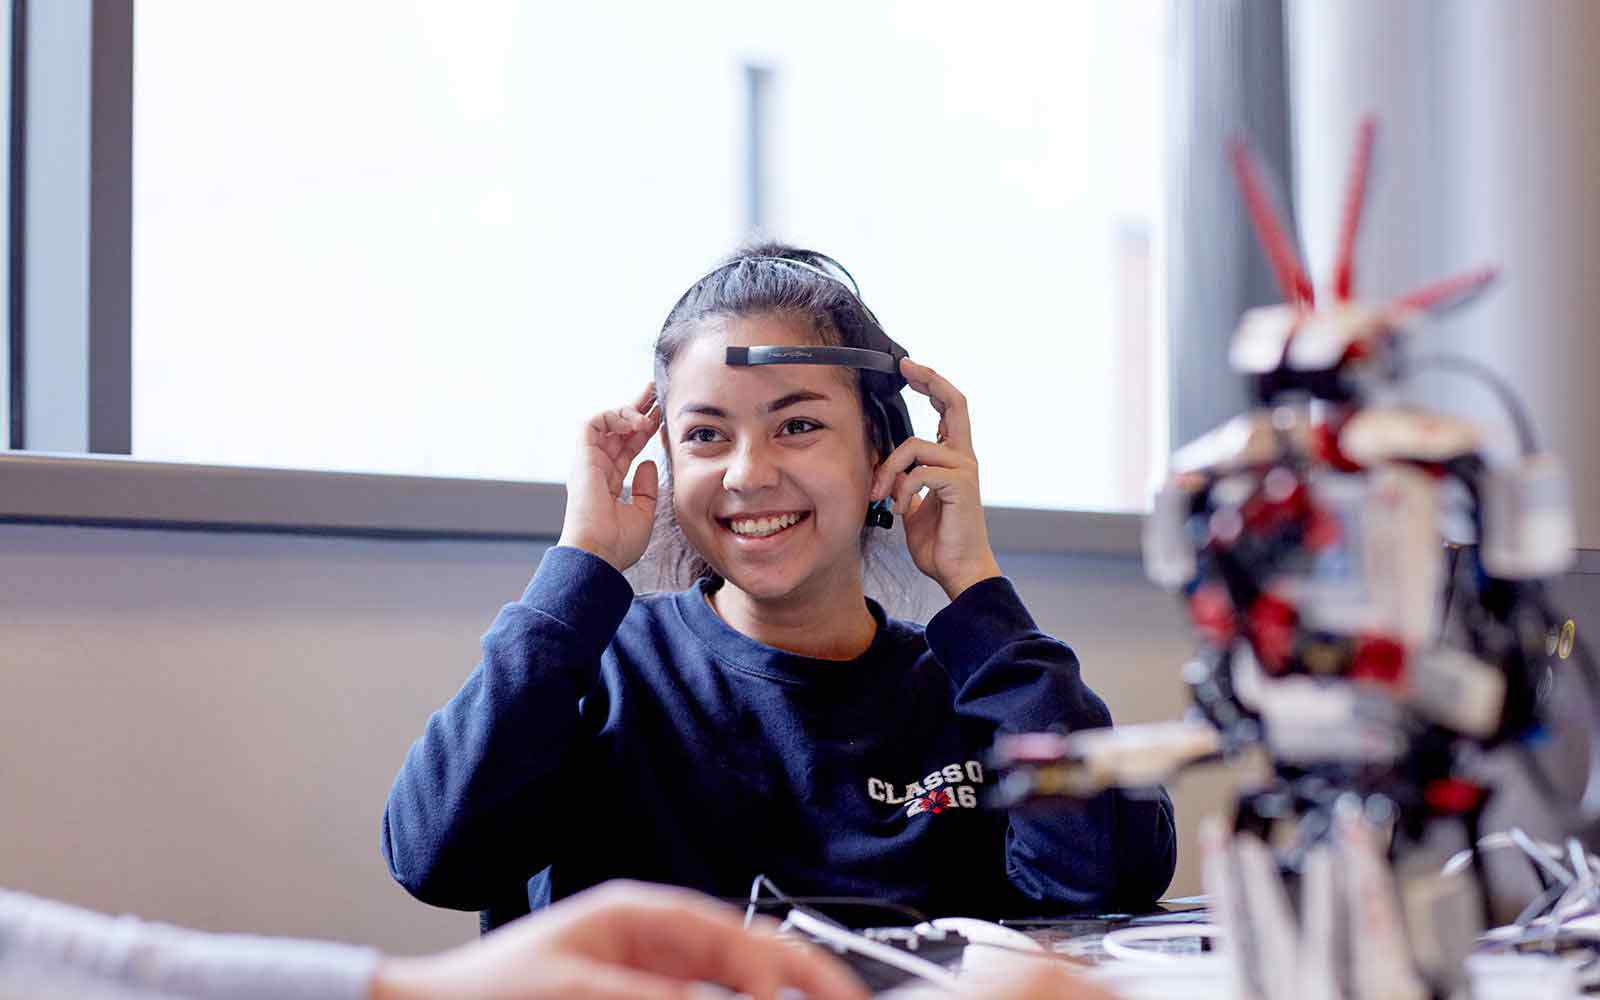 student using the equipment and smiling  